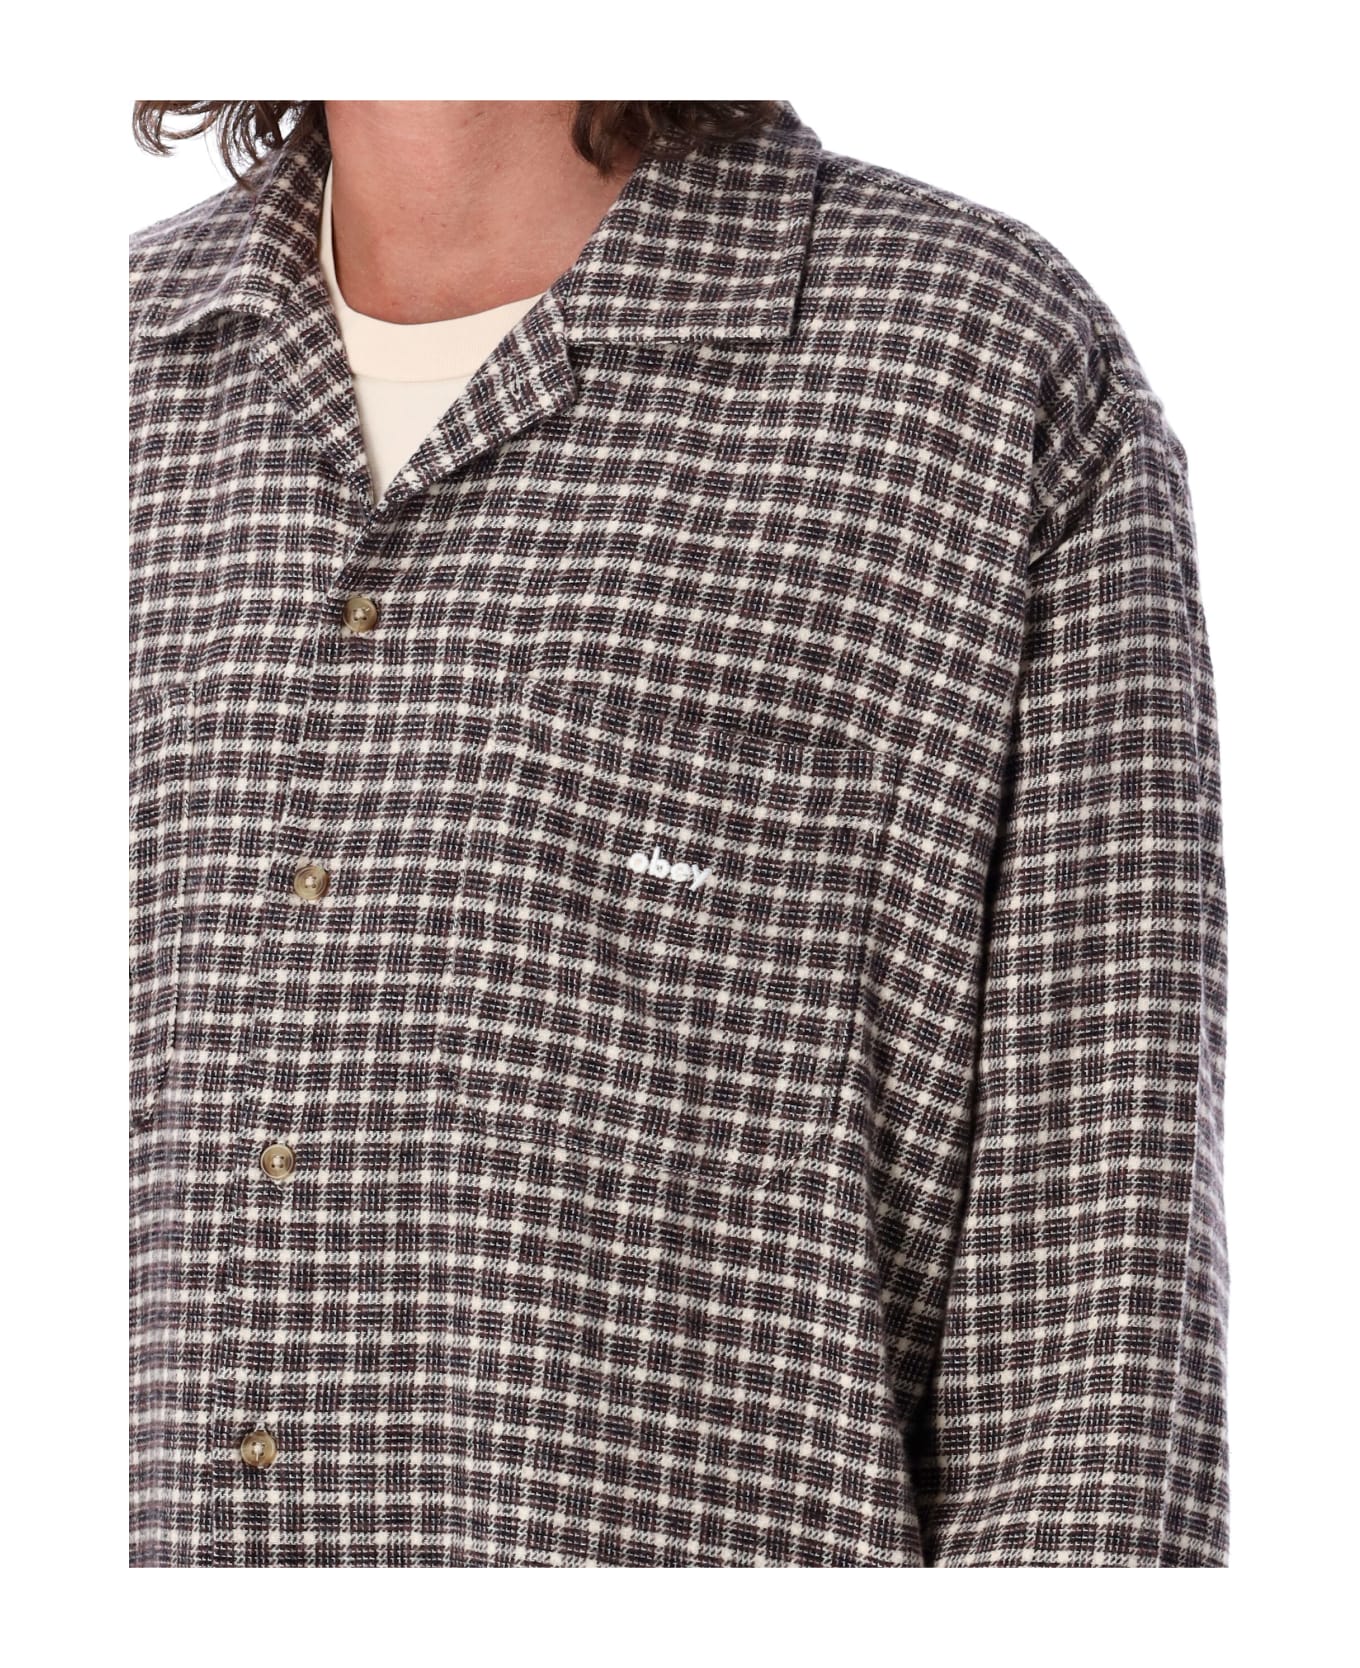 Obey Micro Plaid Shirt - UNBLEACHED MULTI